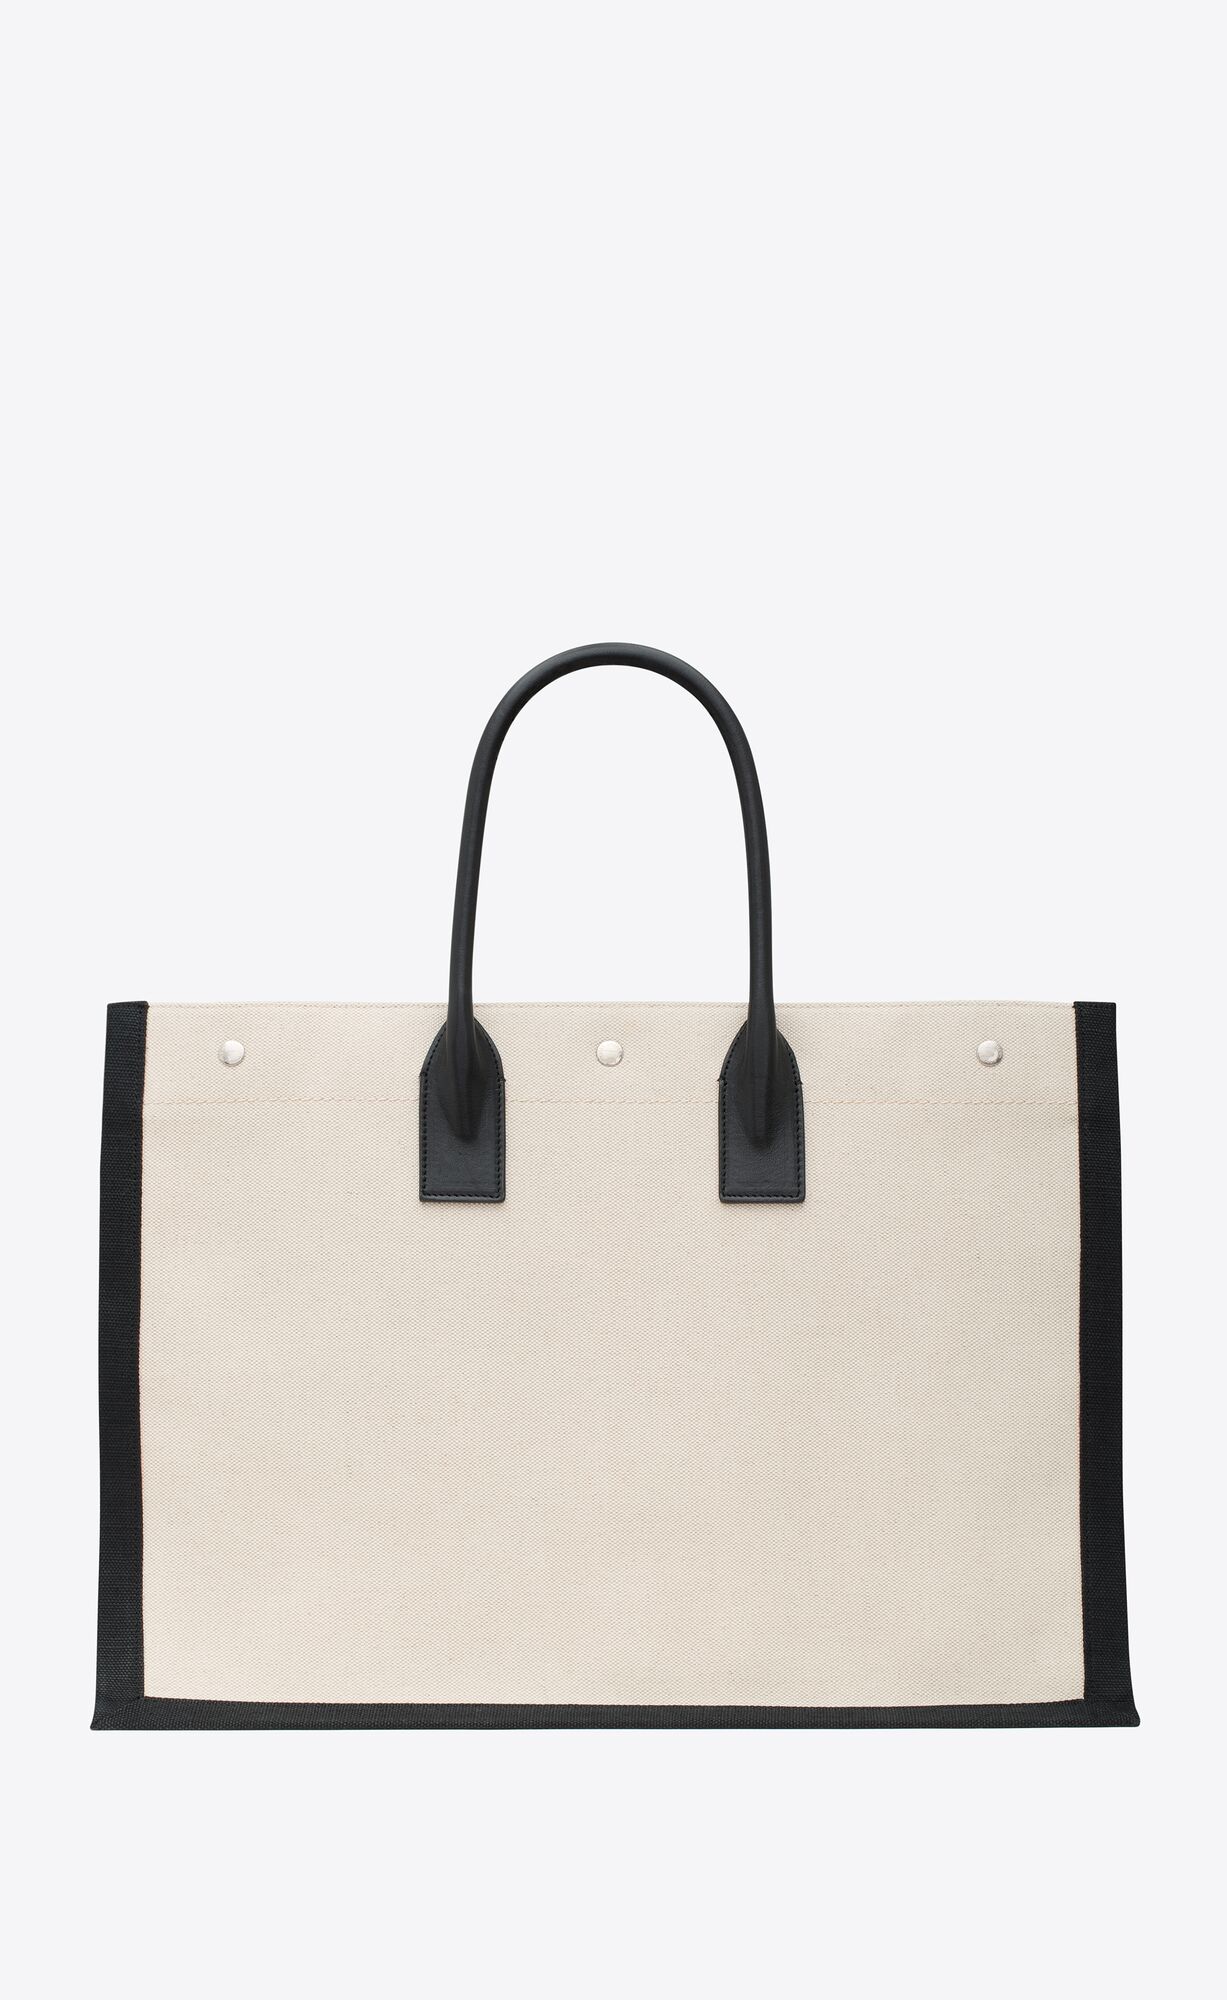 RIVE GAUCHE LARGE TOTE BAG IN CANVAS AND SMOOTH LEATHER | Saint Laurent ...